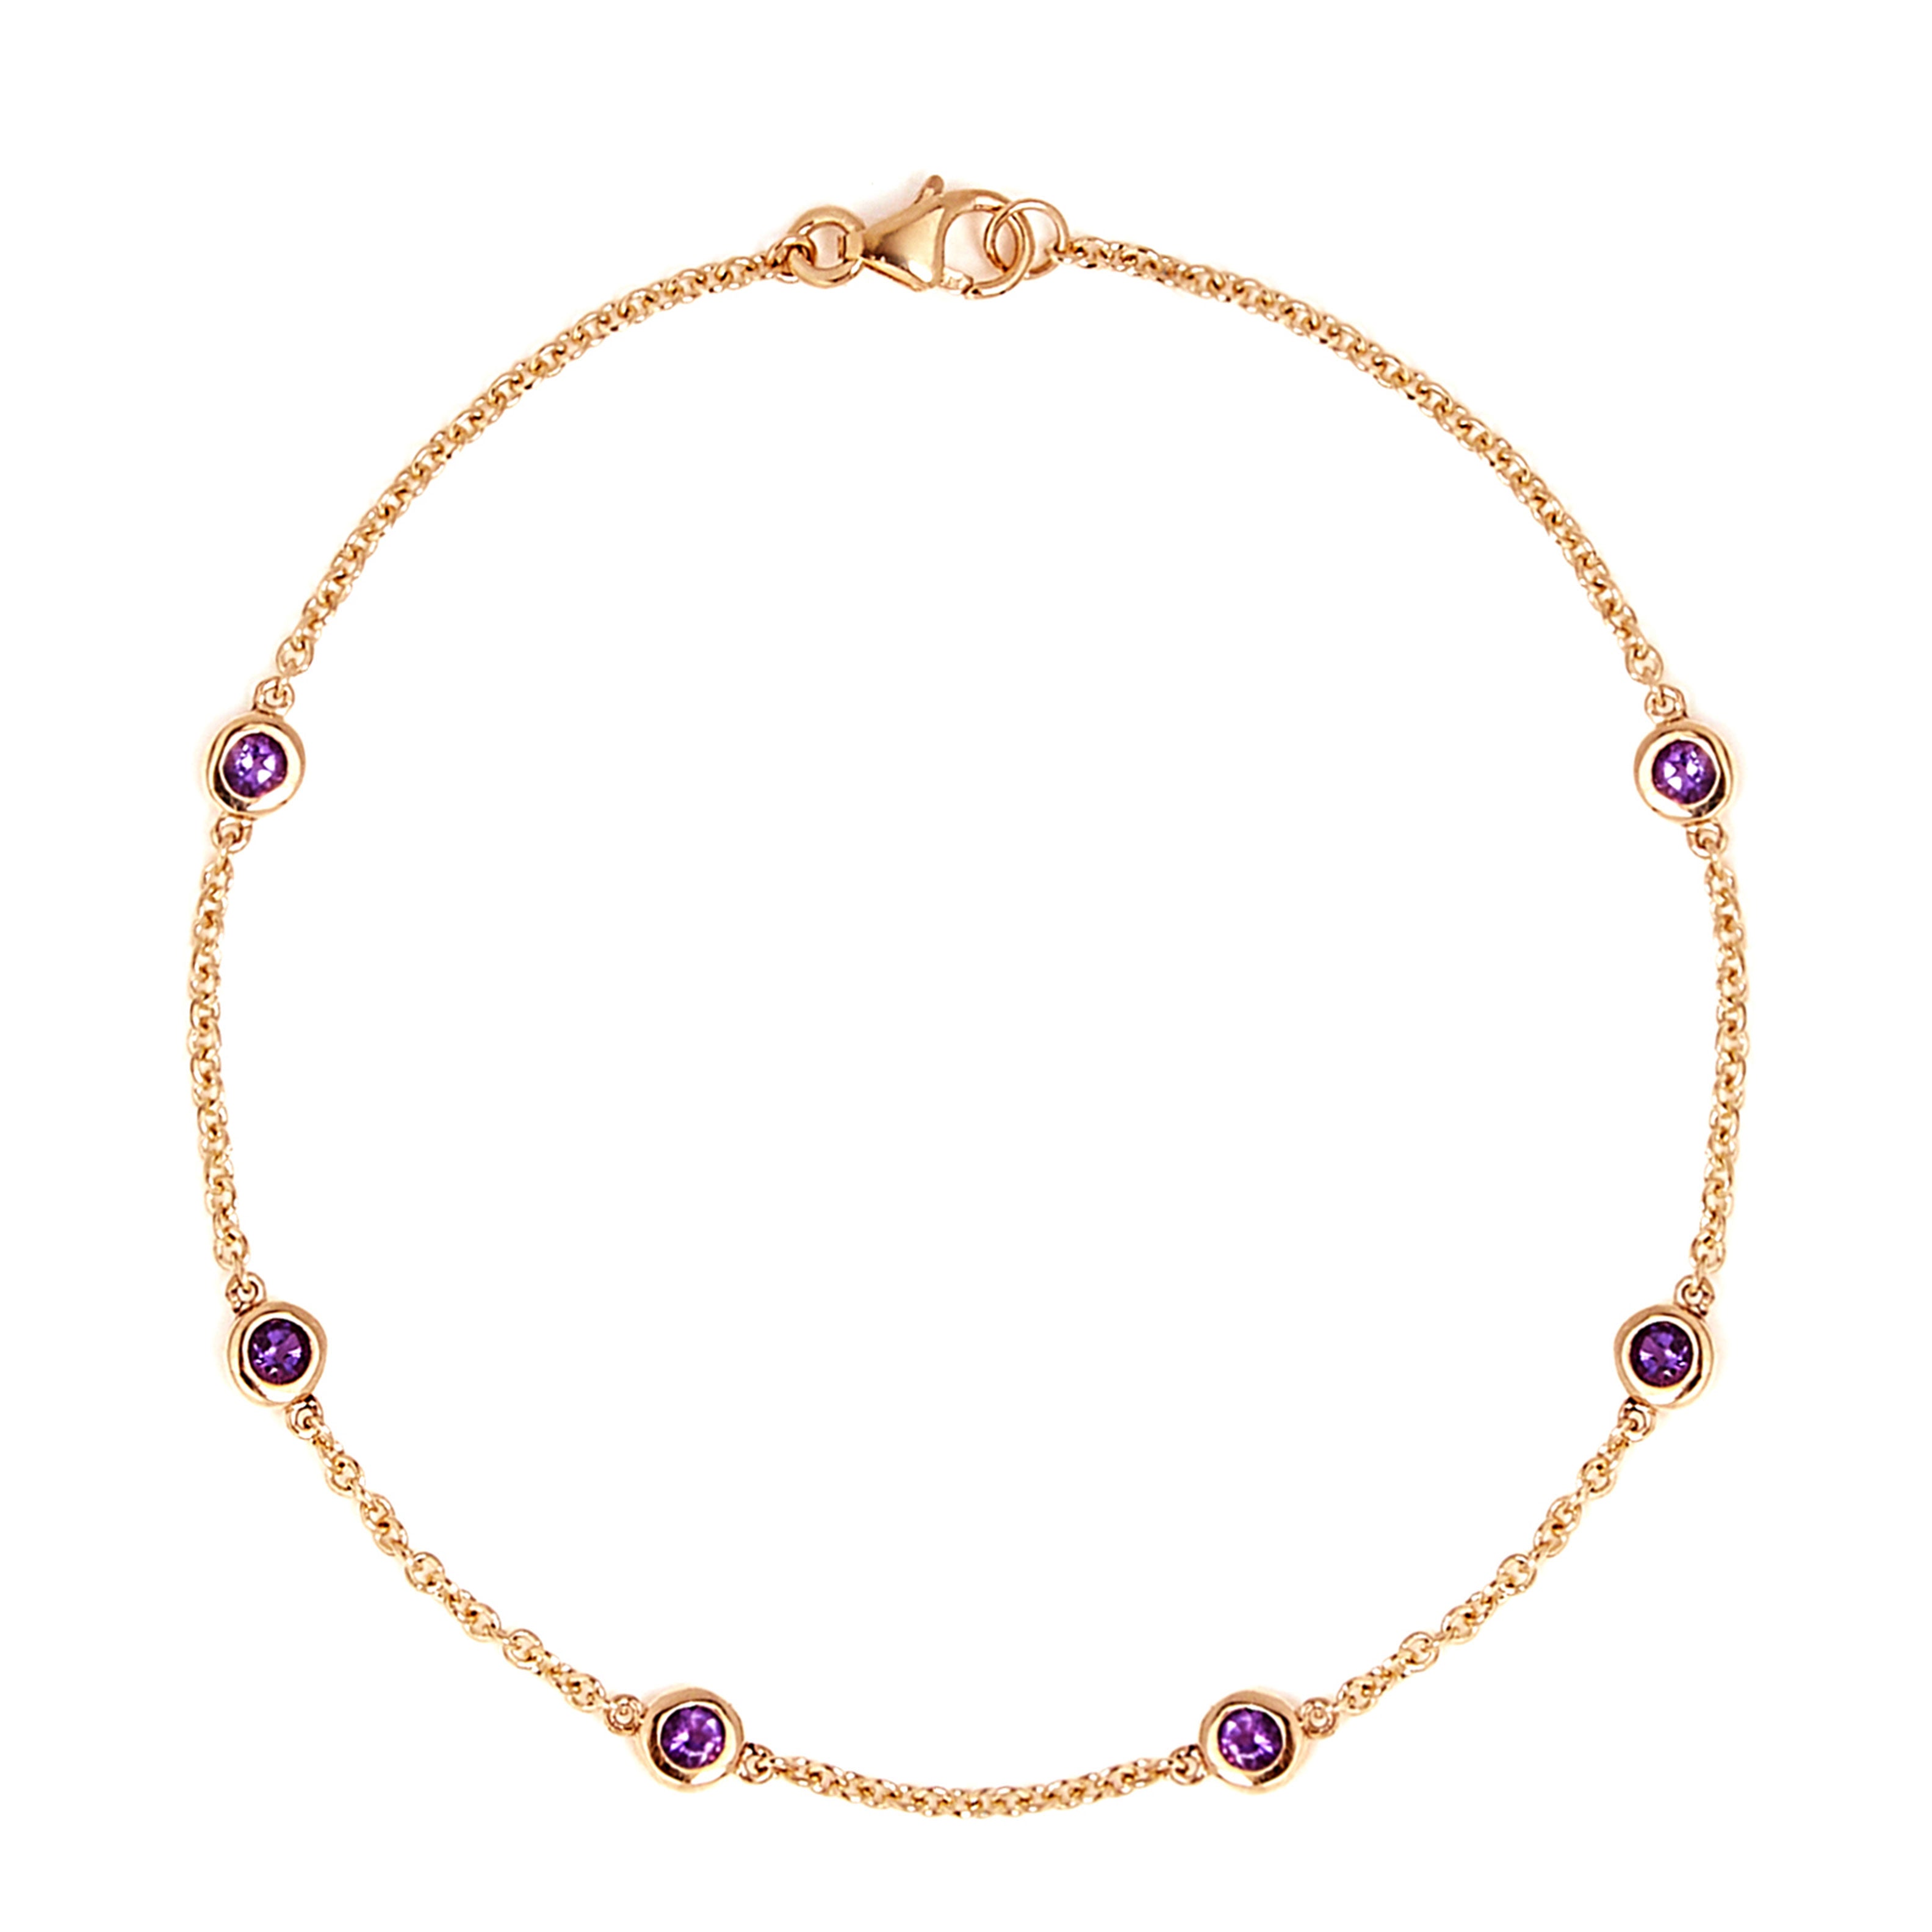 9ct Yellow Gold Chain Bracelet with Spectacle-Set Amethyst